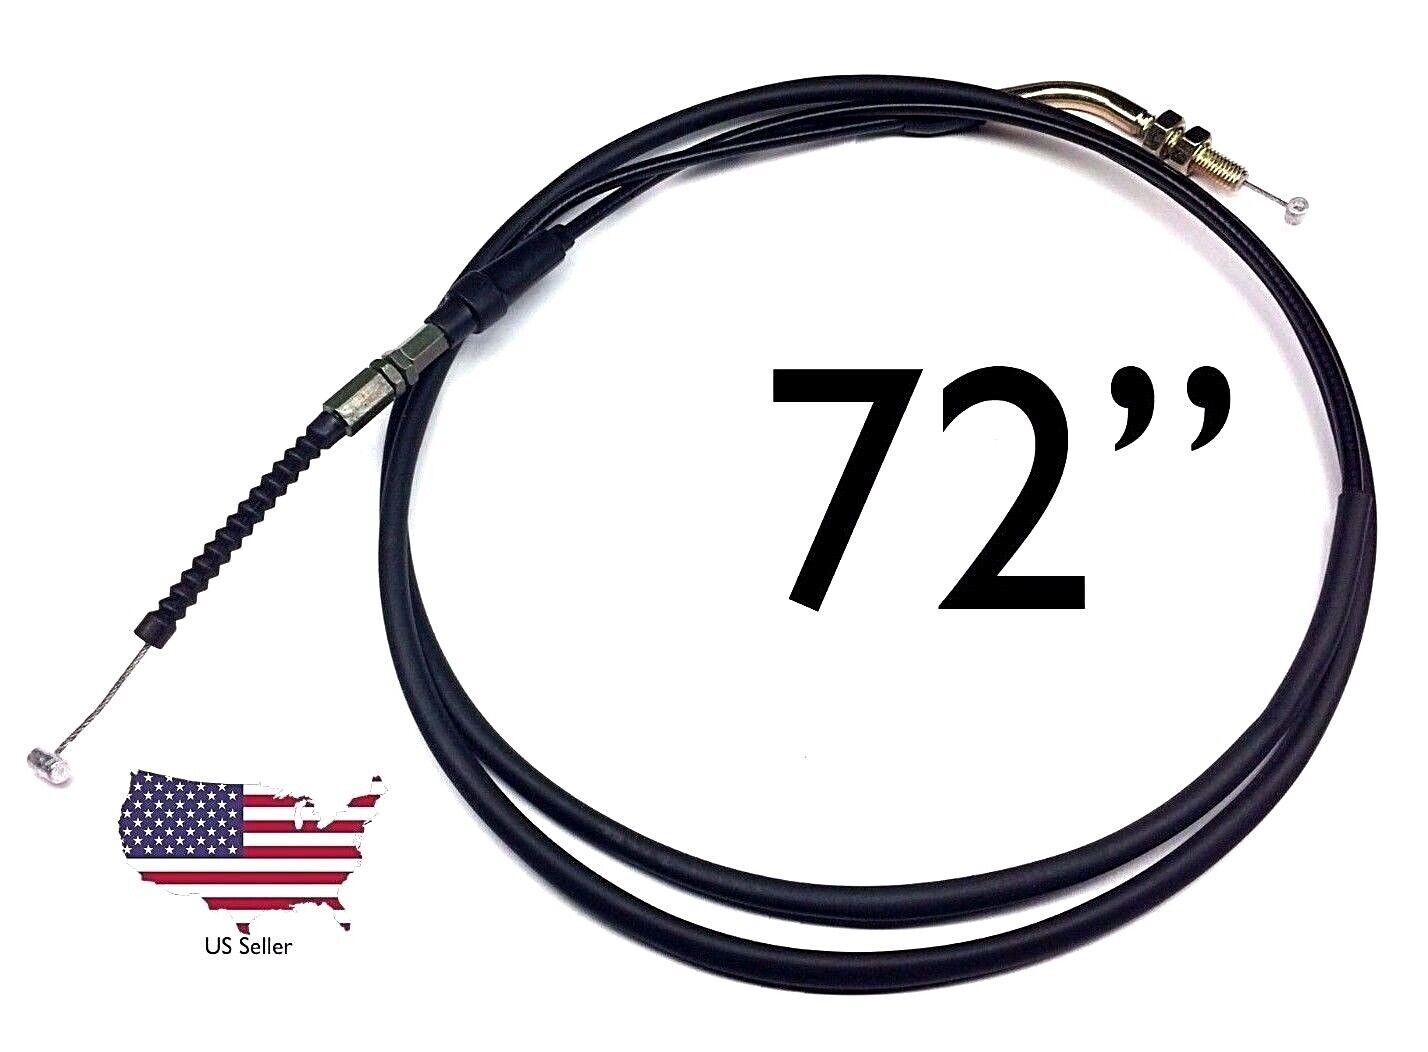 Universal Throttle Cable For 10mm 72"-75" Six Feet Steel 150cc 200cc 250cc US